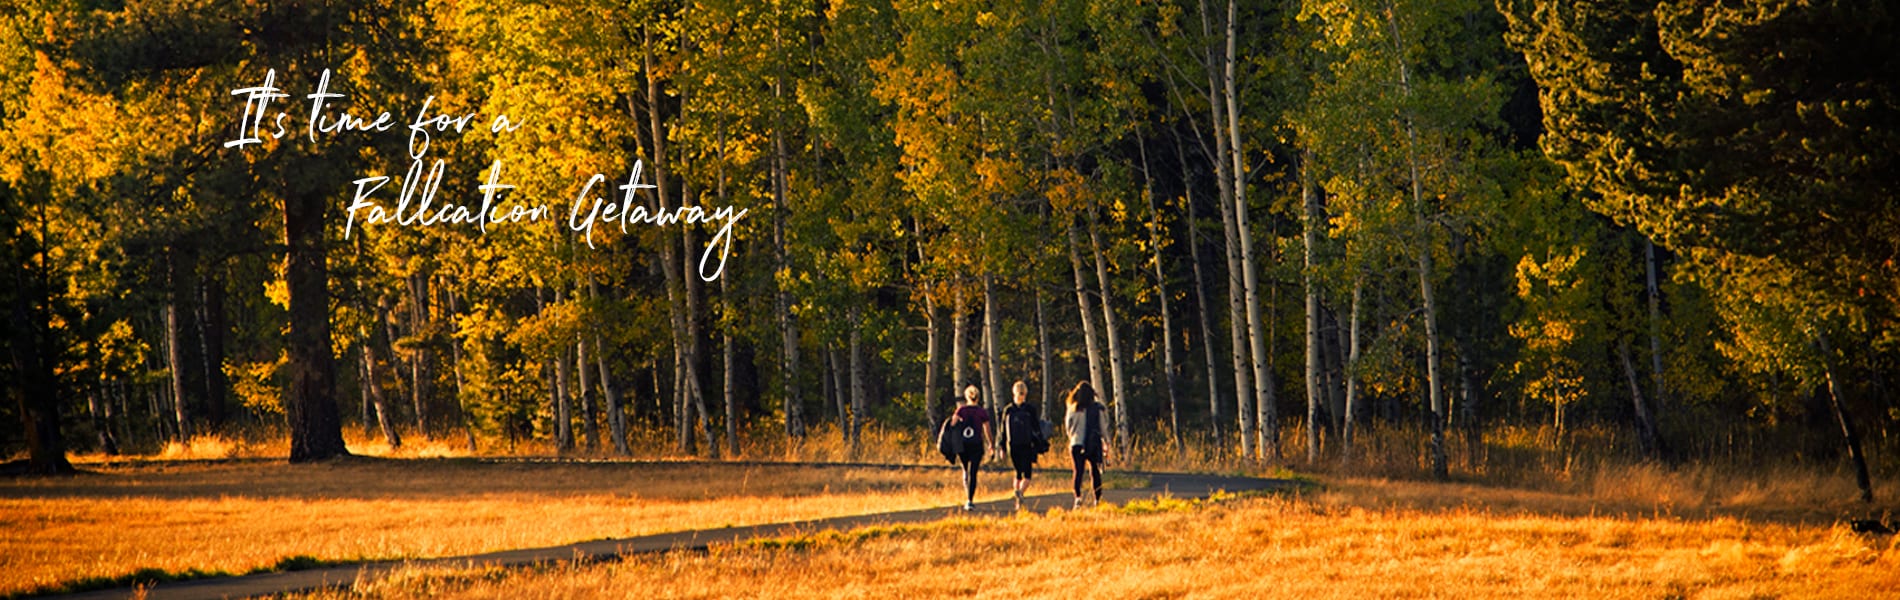 People walking in on an autumn trail. Text: It's Time for a Fallcation Getaway.